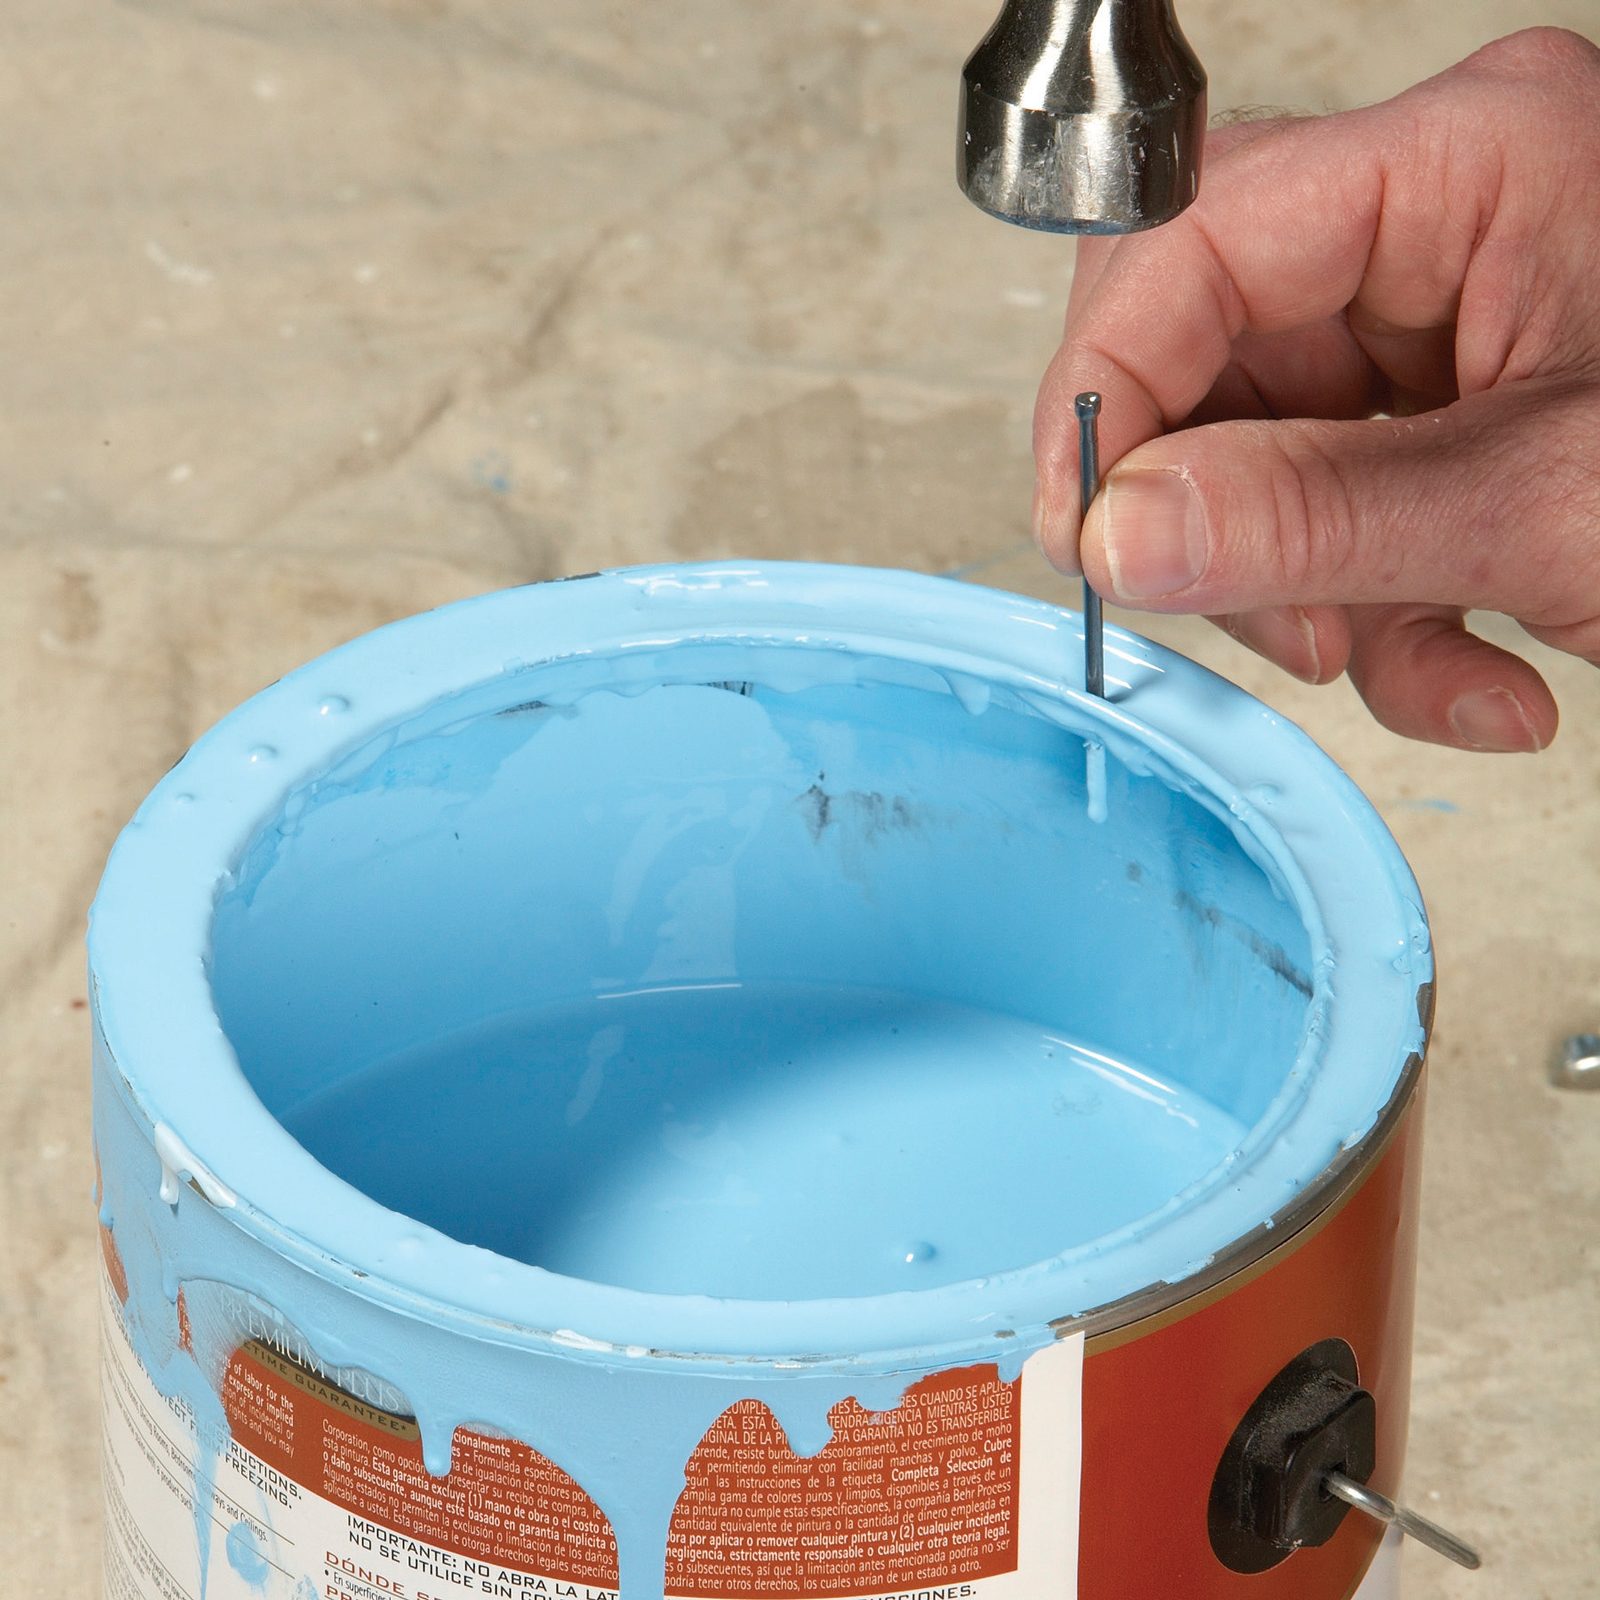 hammer nail into side of painty paint can